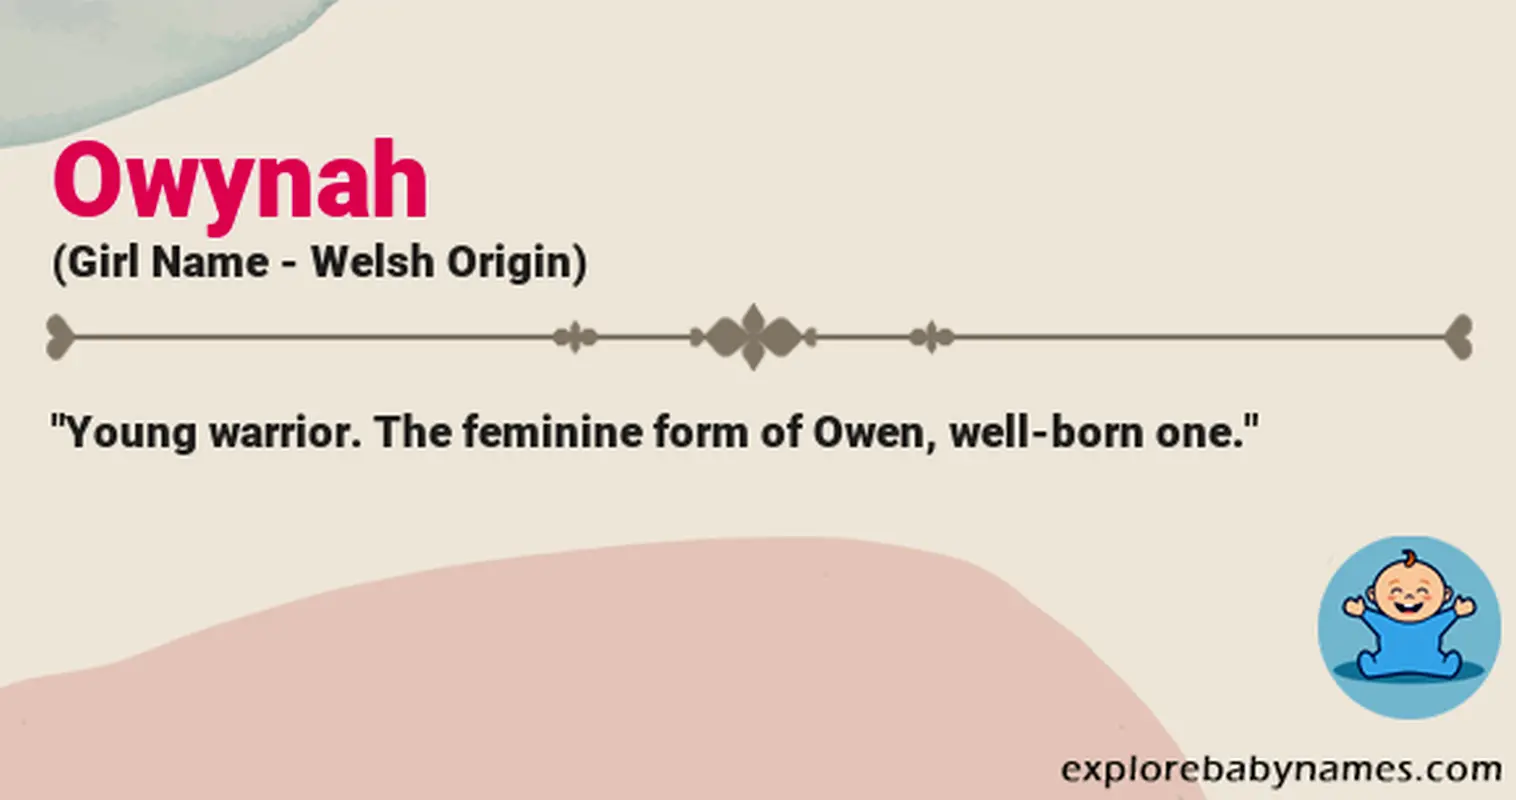 Meaning of Owynah